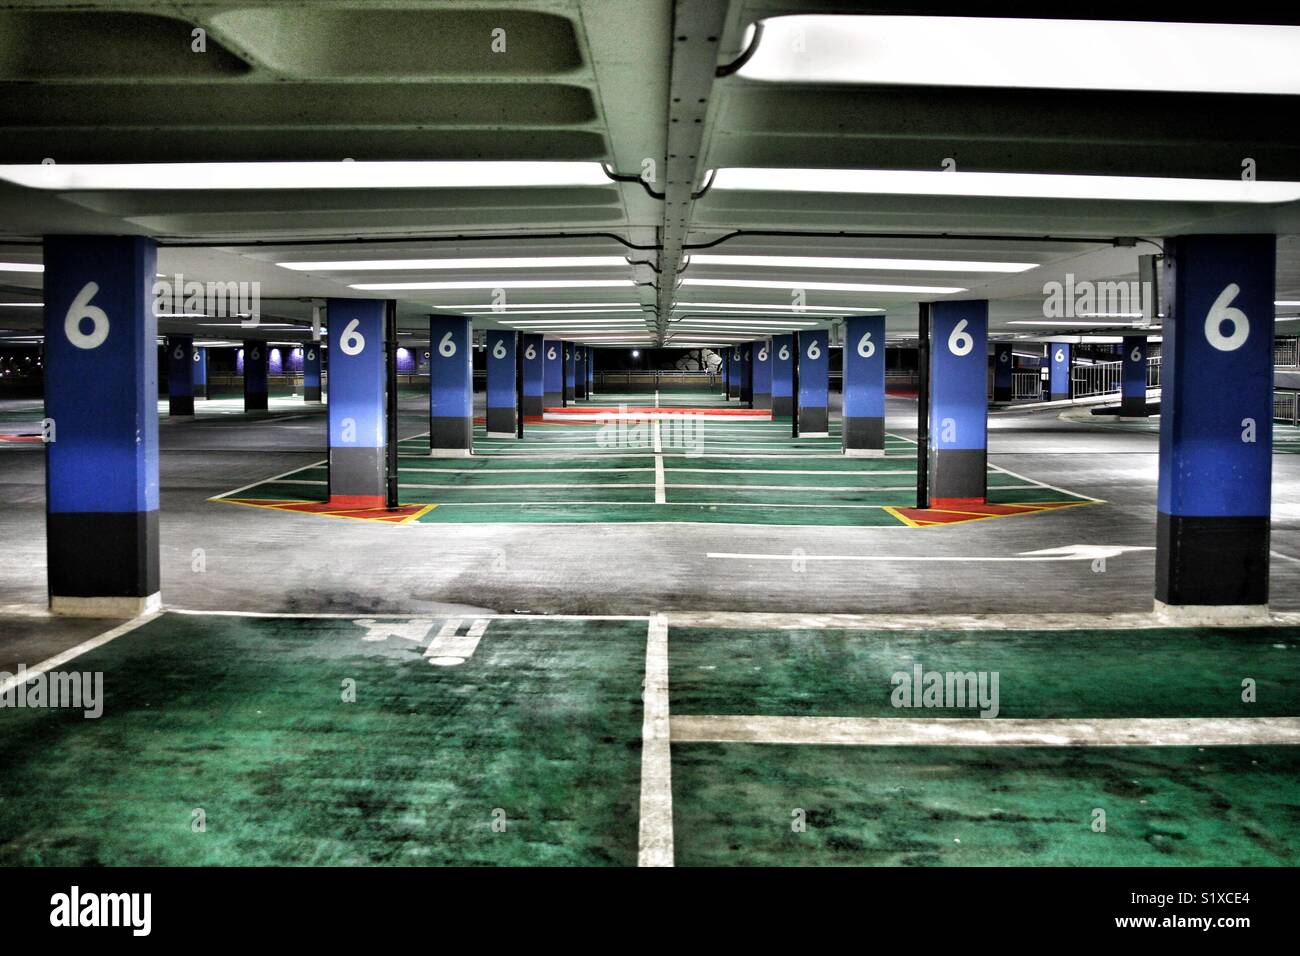 The interior of level 6 of a deserted multi story car park with harsh lights illuminating colourful parking spaces and columns Stock Photo